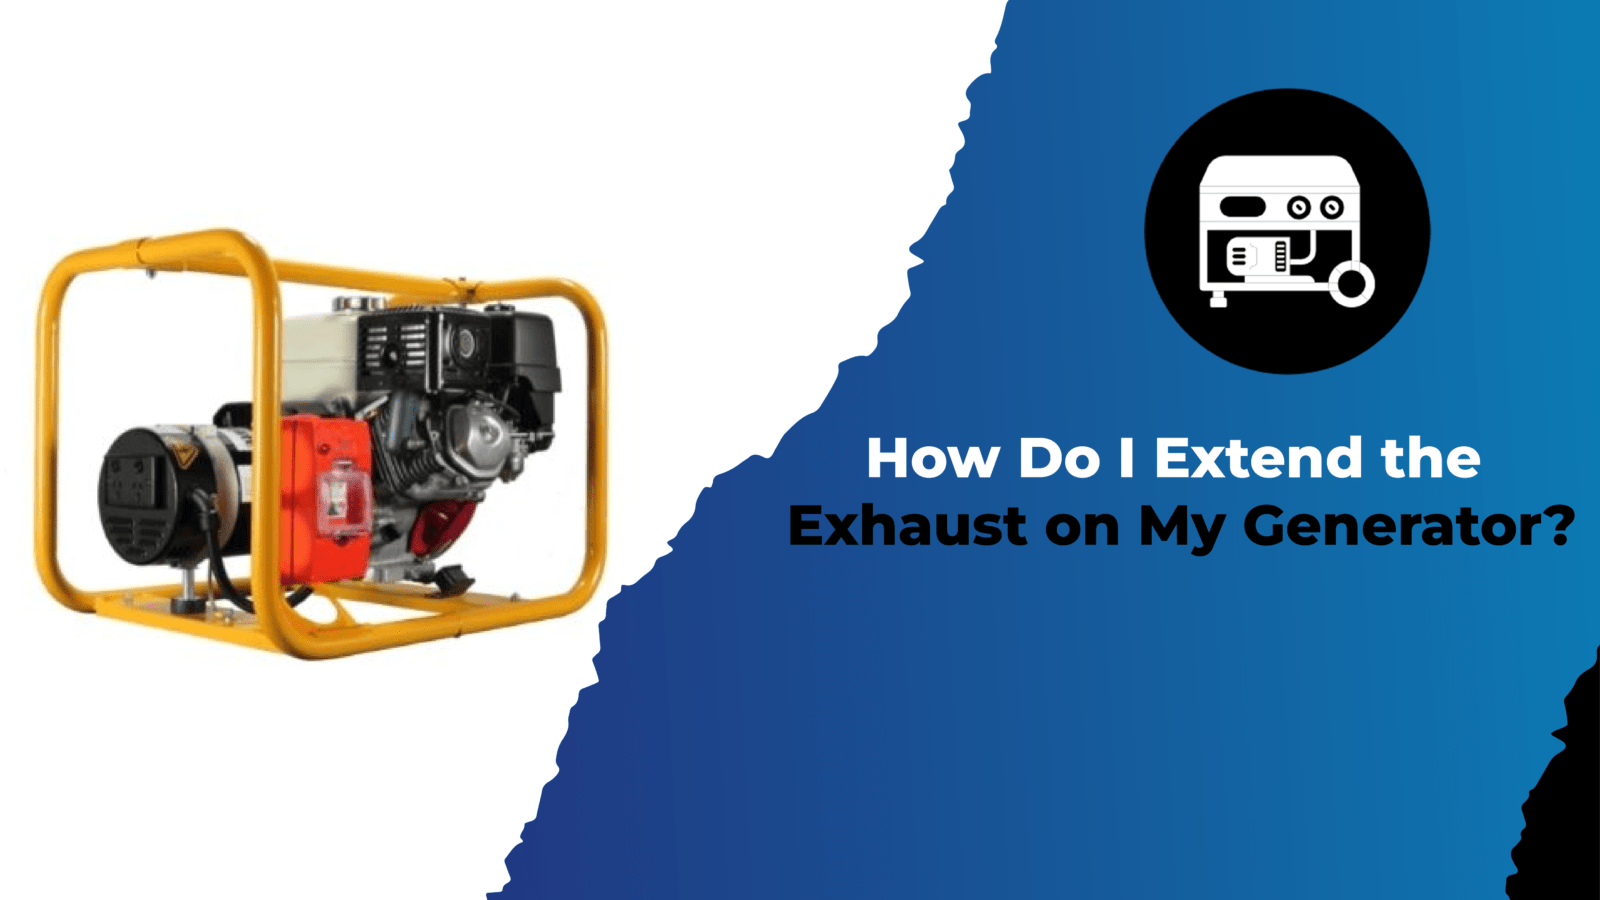 How Do I Extend the Exhaust on My Generator